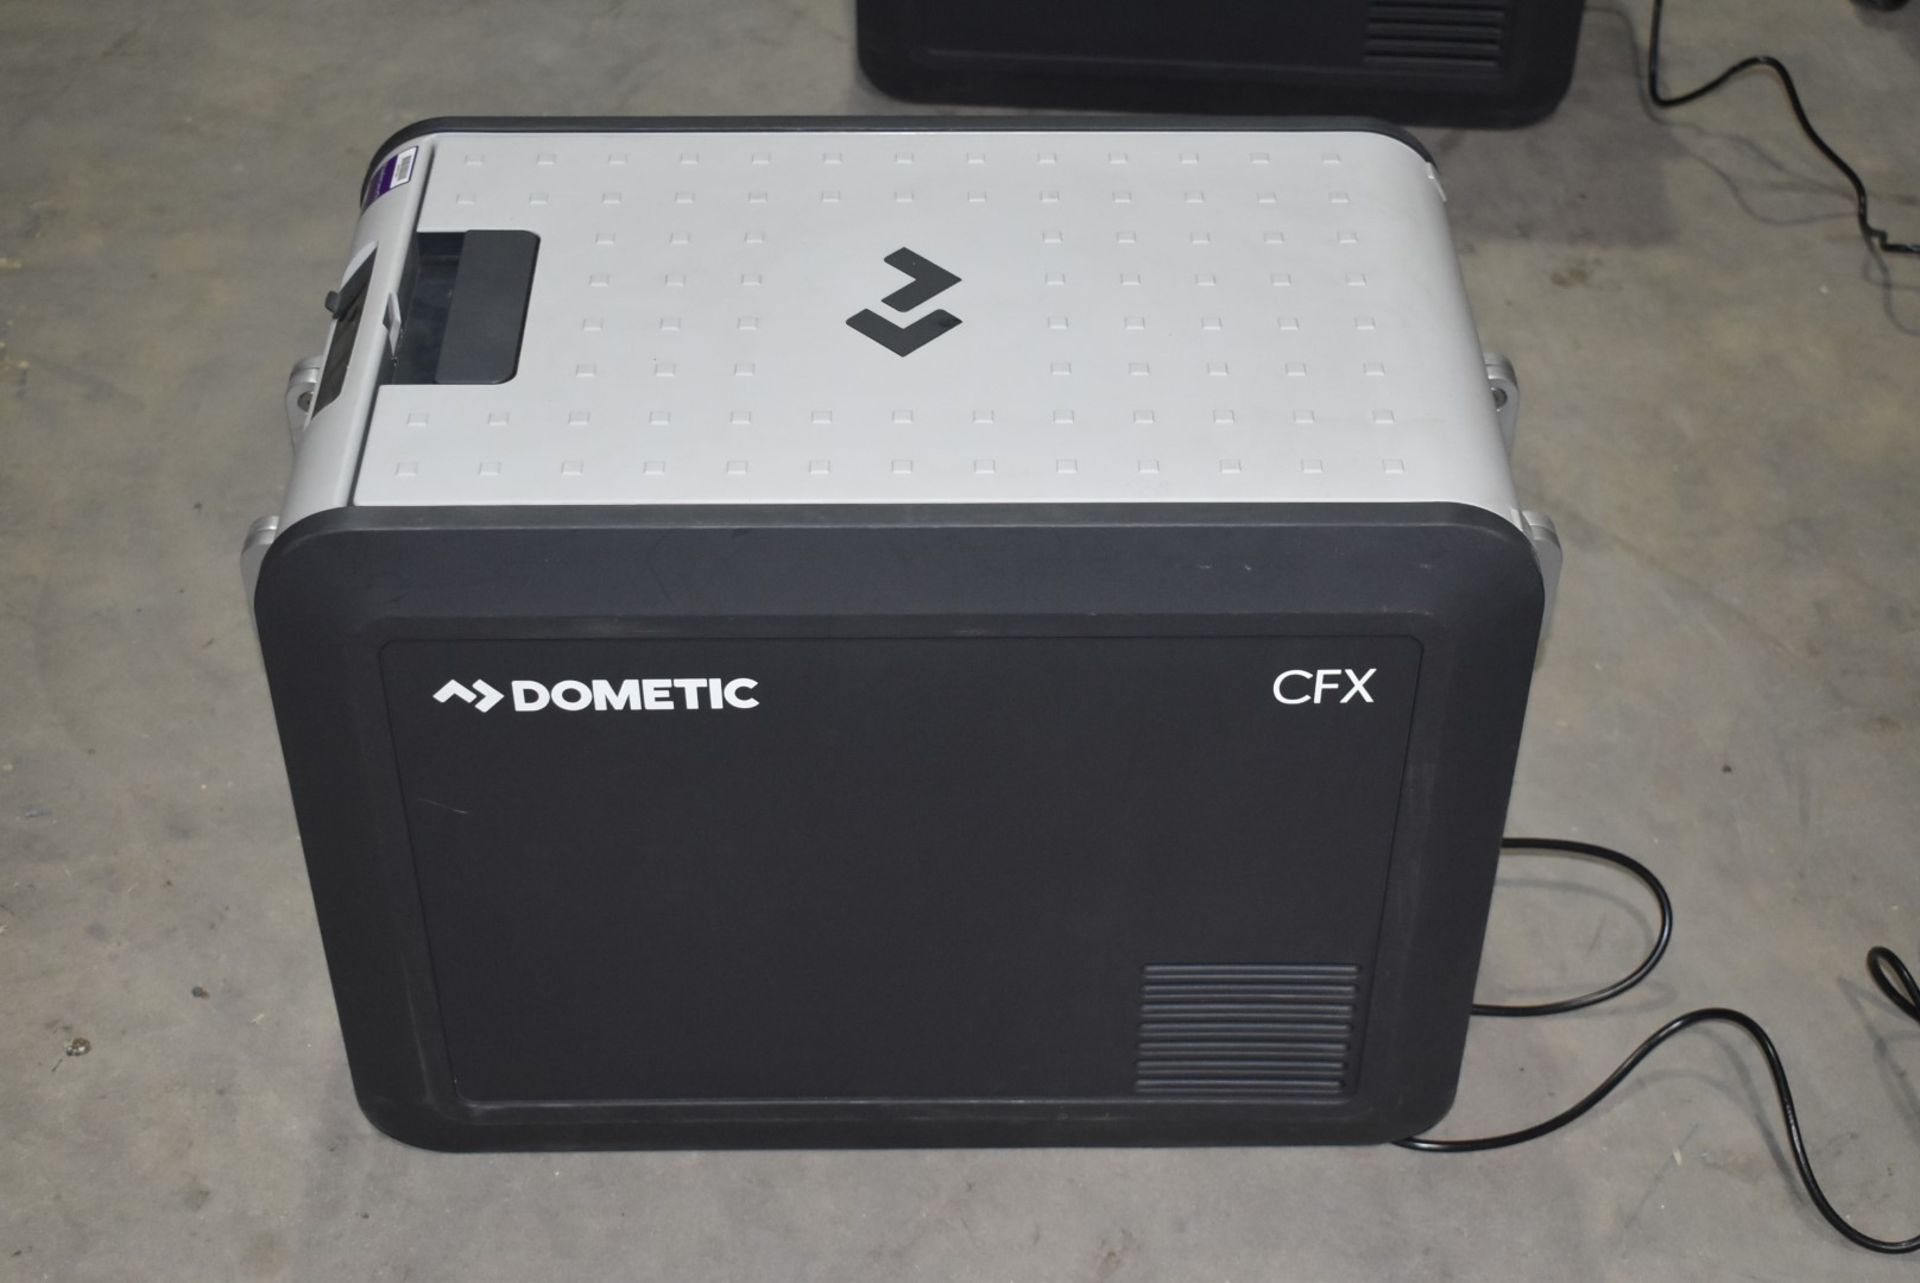 1 x Dometic CFX3 45 Portable 40l Compressor Cooler and Freezer - Features Bluetooth and WiFi - Image 4 of 10